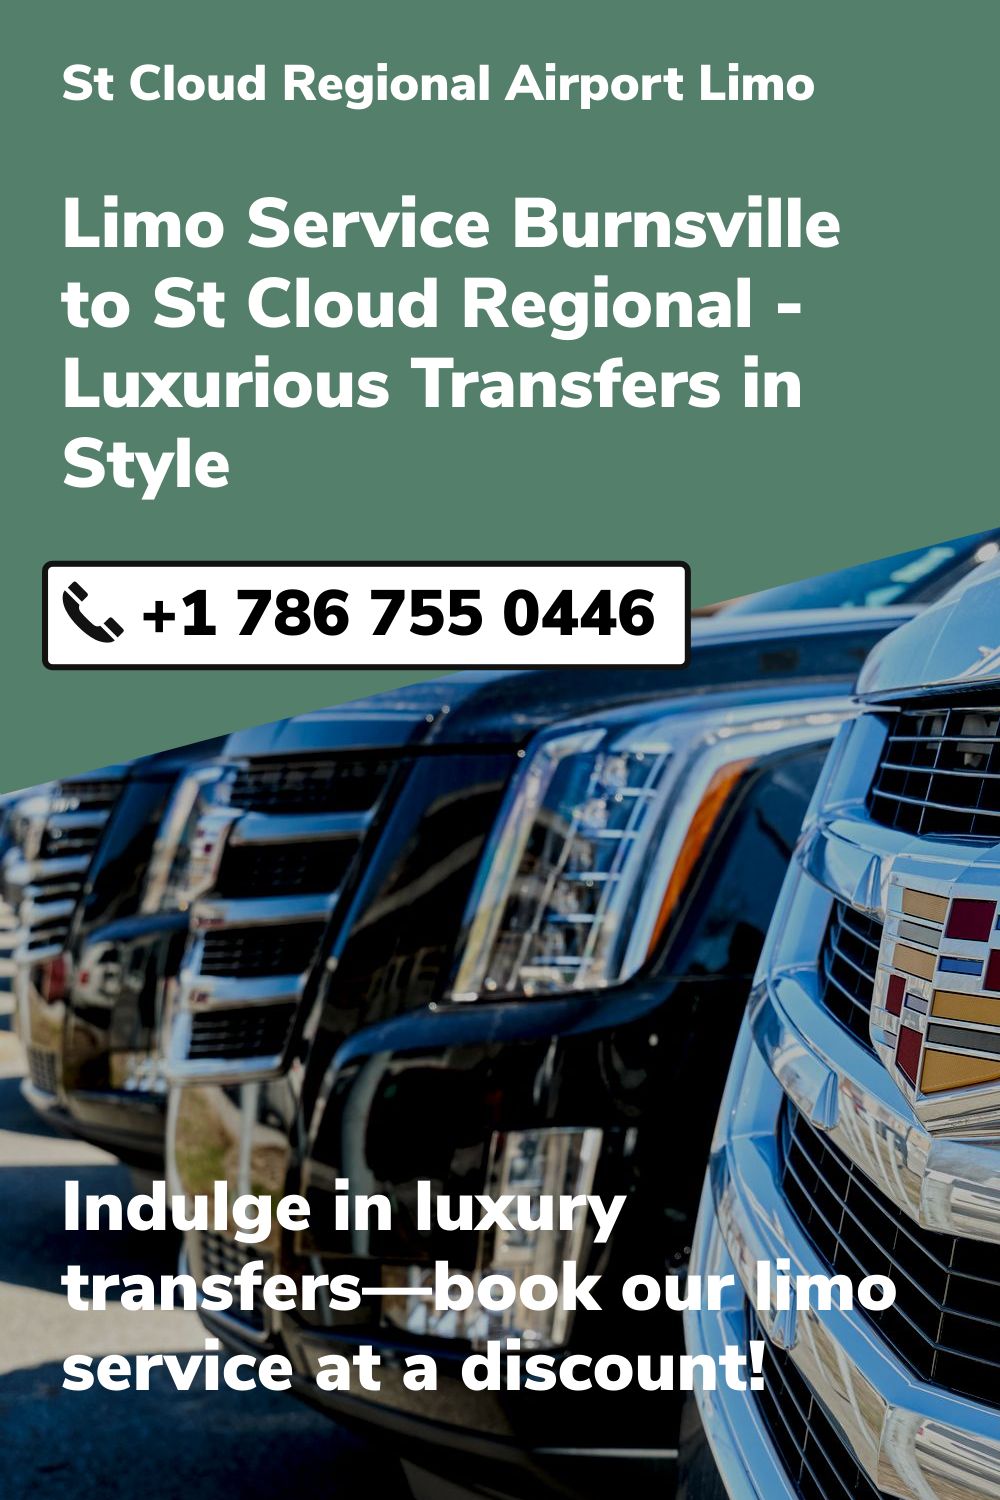 St Cloud Regional Airport Limo